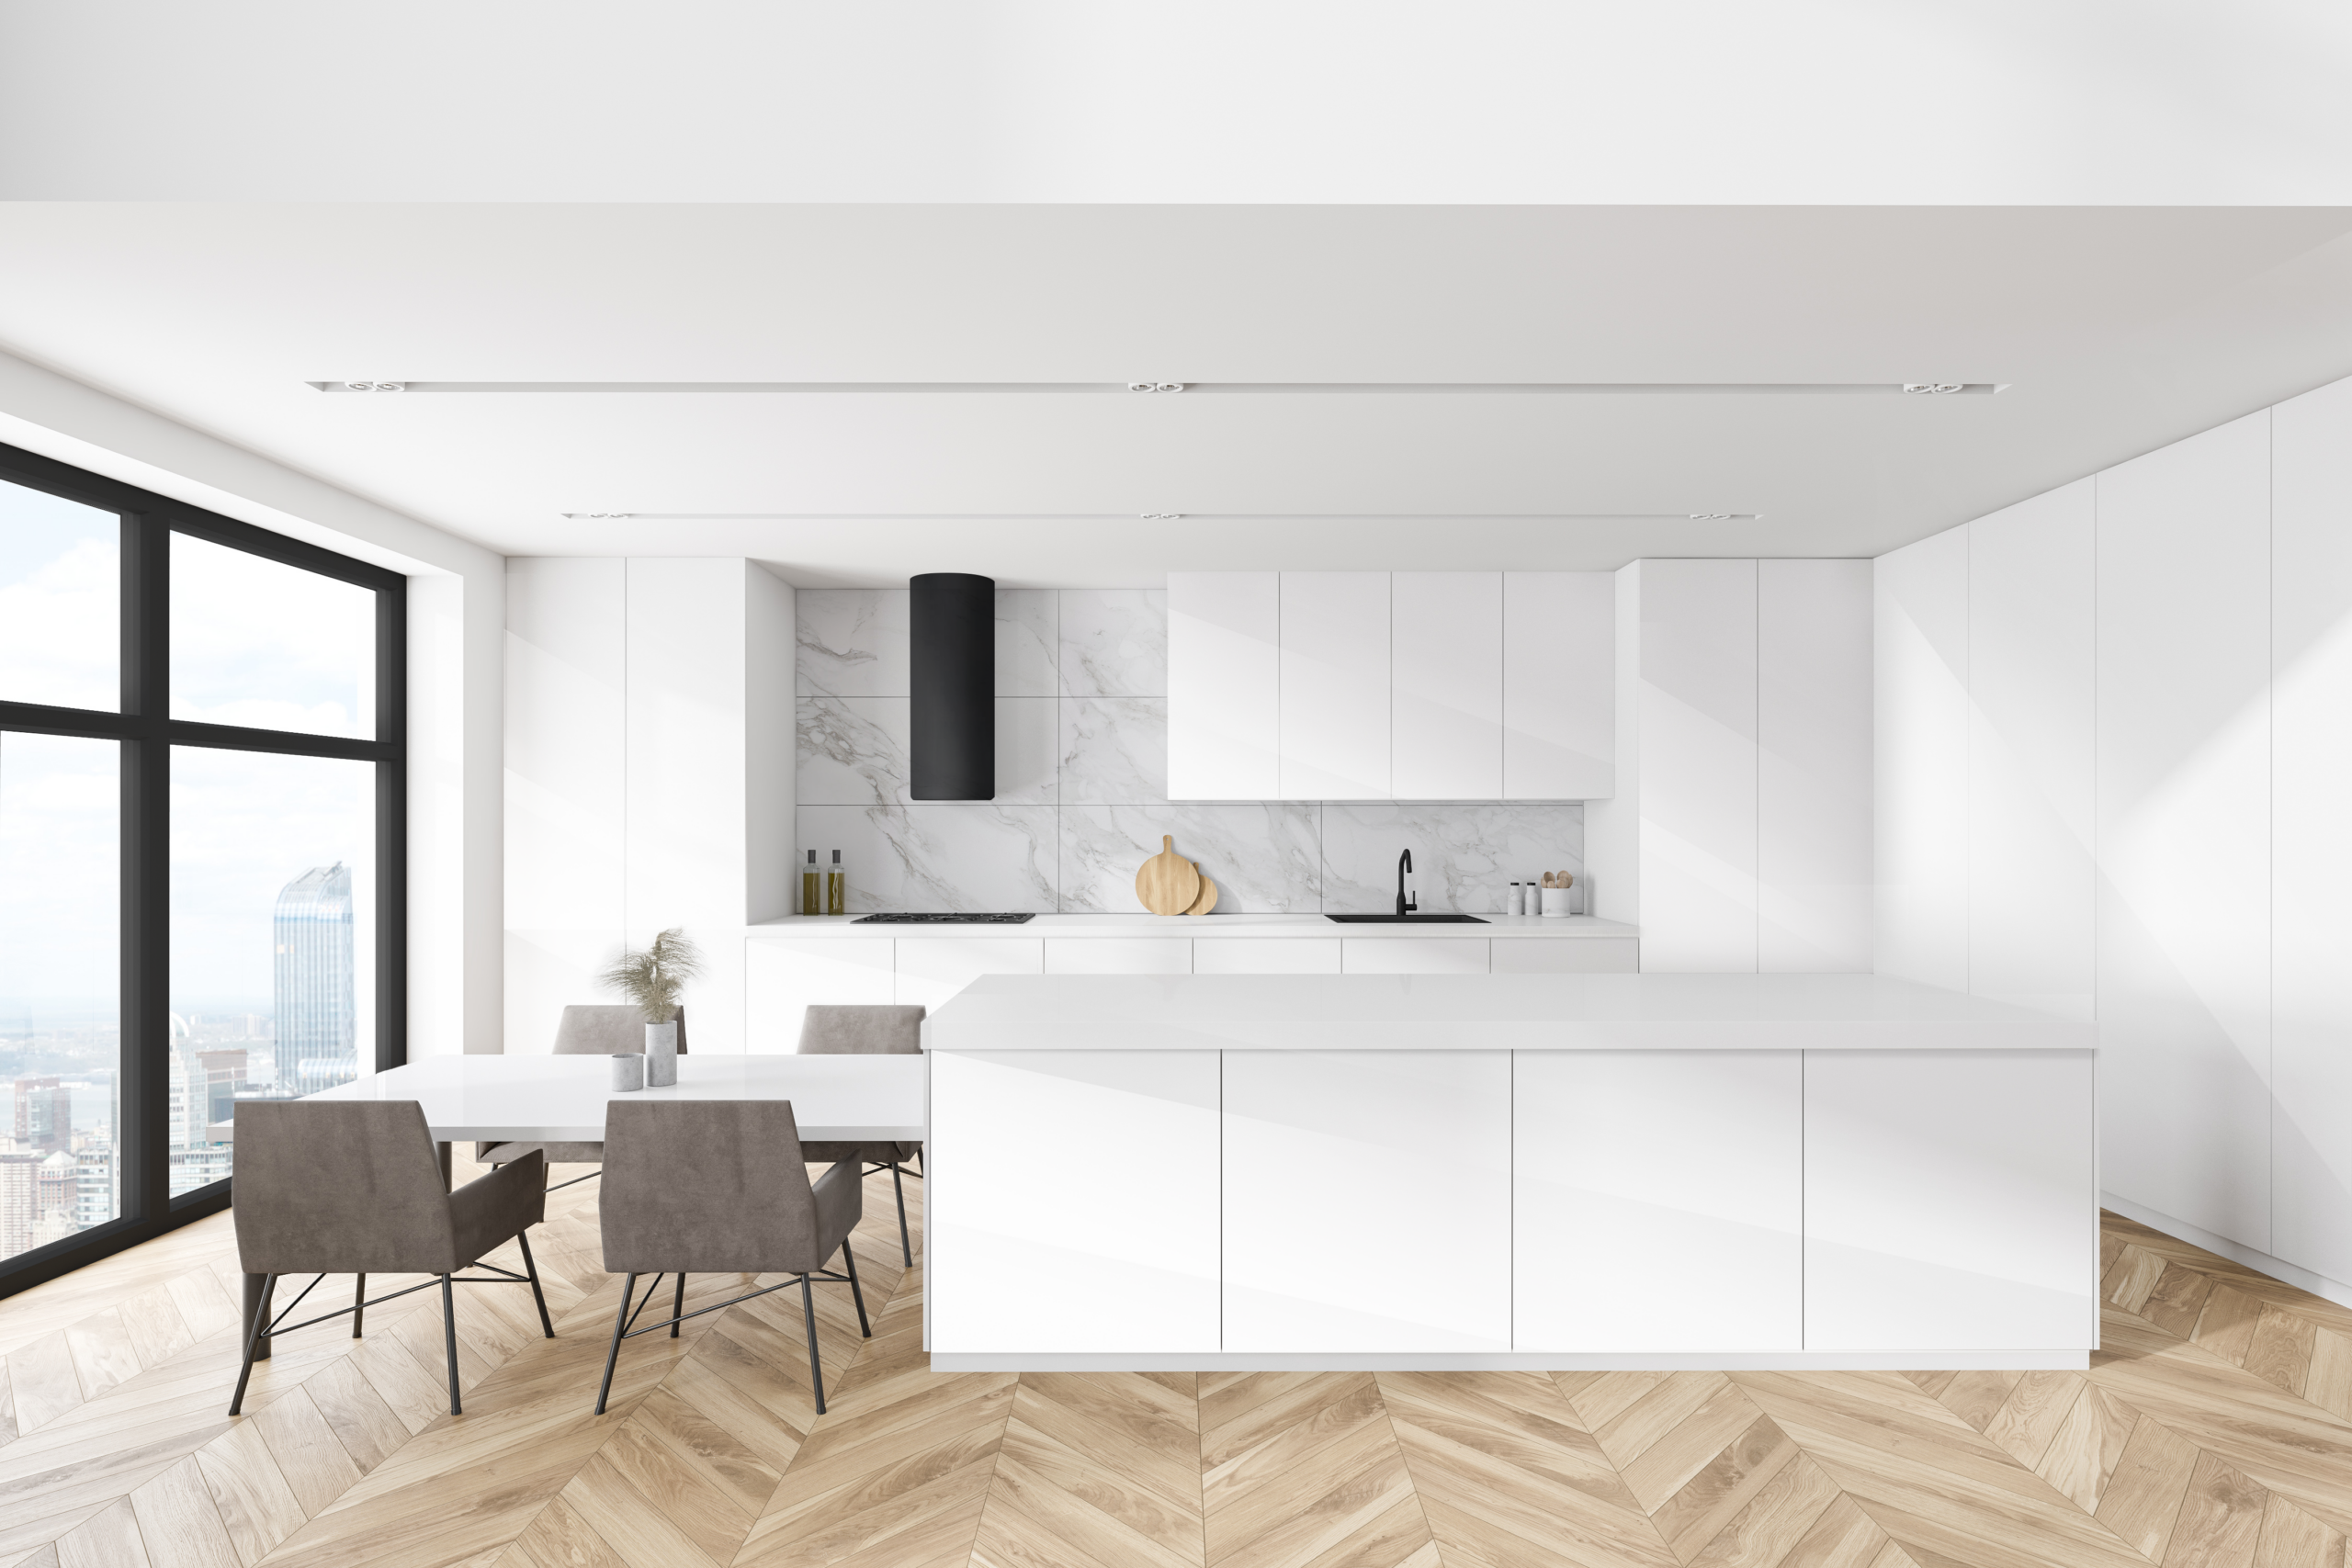 White Handleless contemporary kitchen cabinets